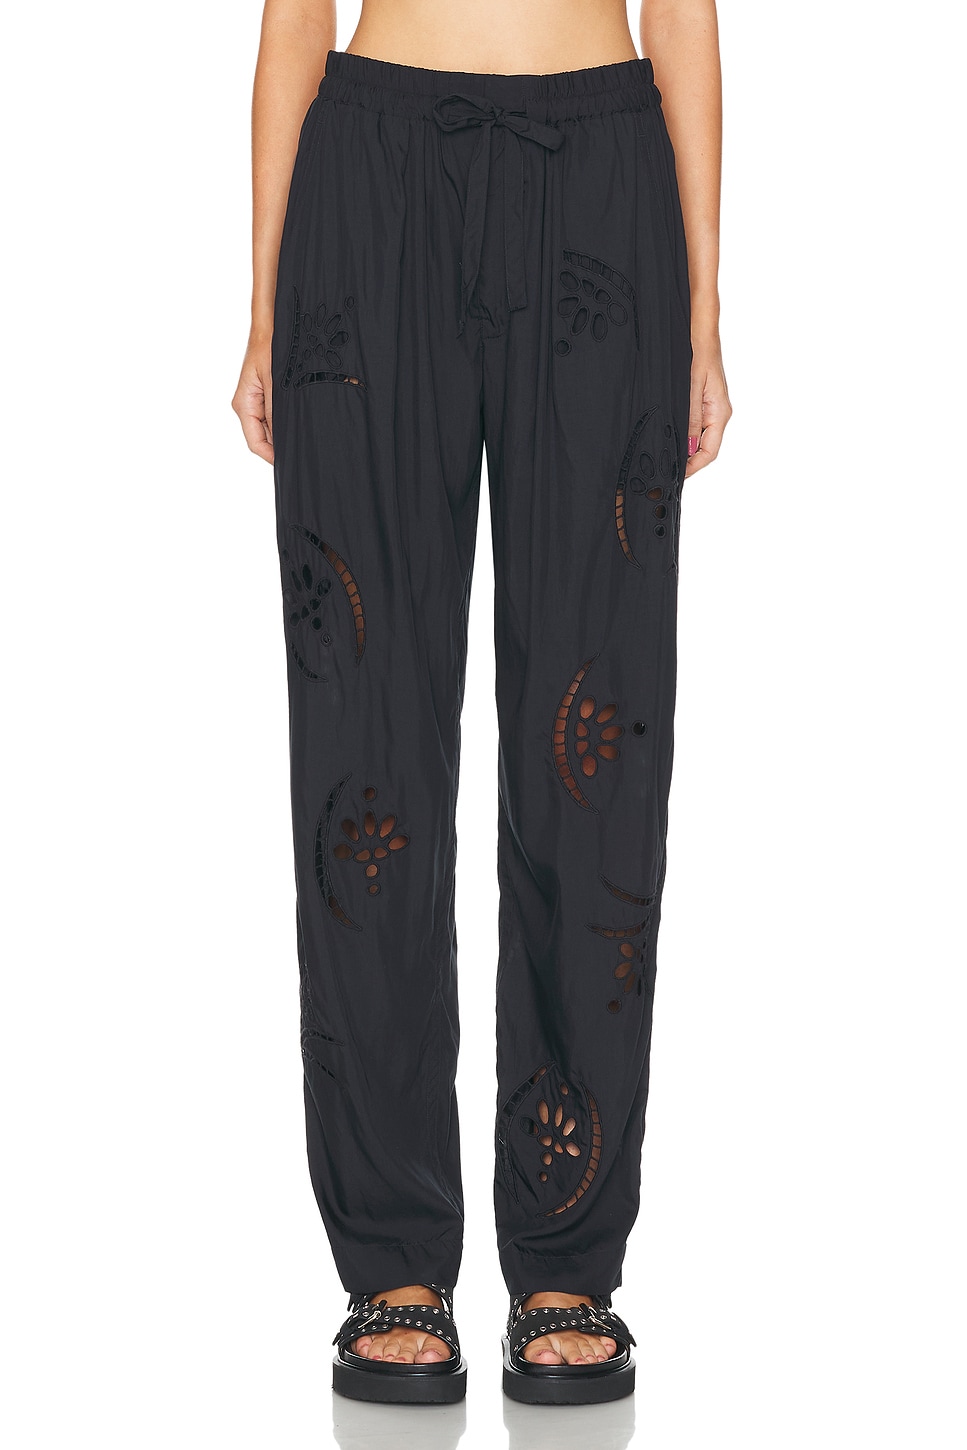 Image 1 of Isabel Marant Hectorina Pant in Faded Black